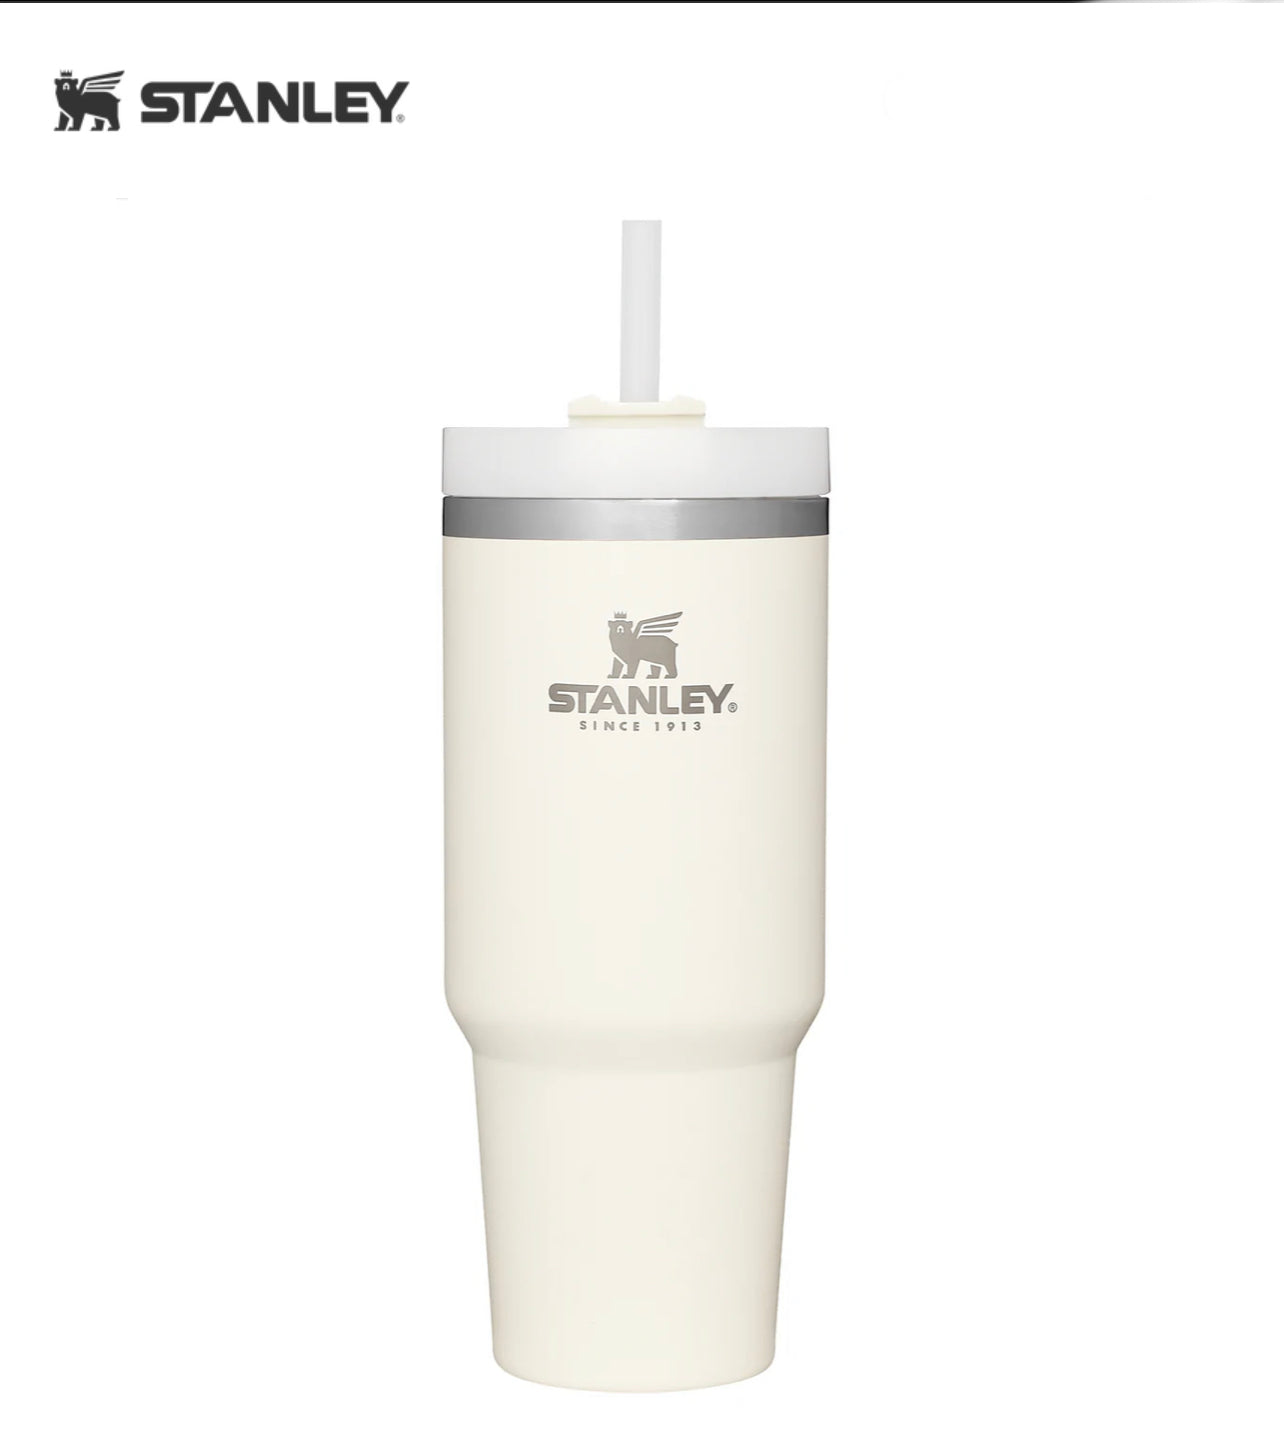 New Stanley cups so cute!!, Gallery posted by B Holmes